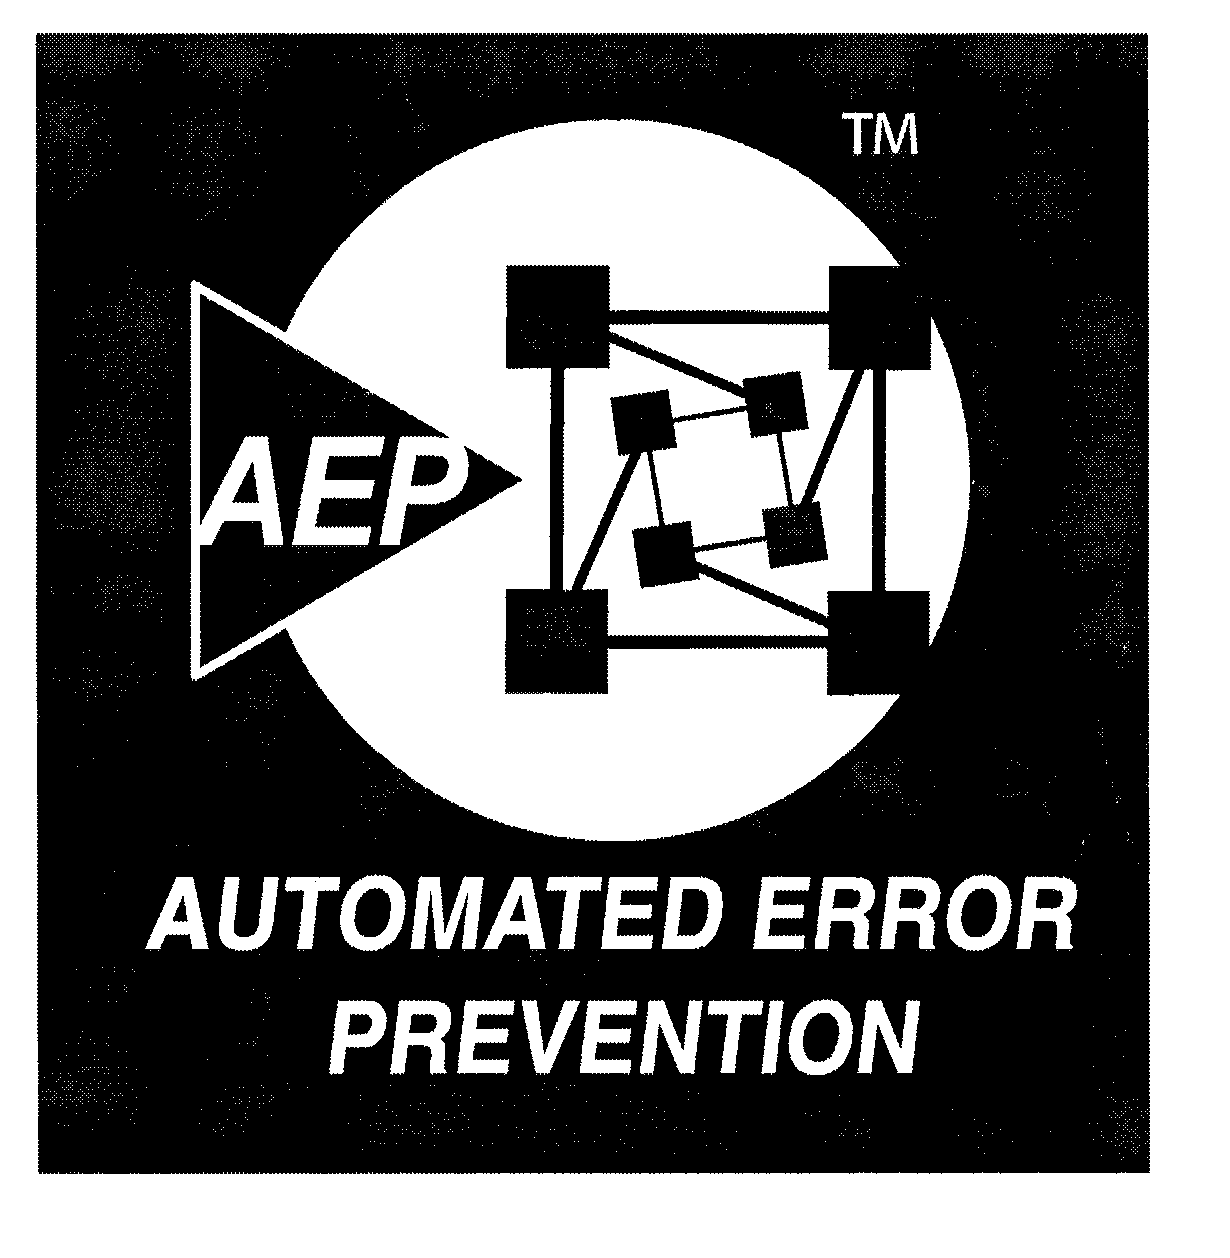  AEP AUTOMATED ERROR PREVENTION